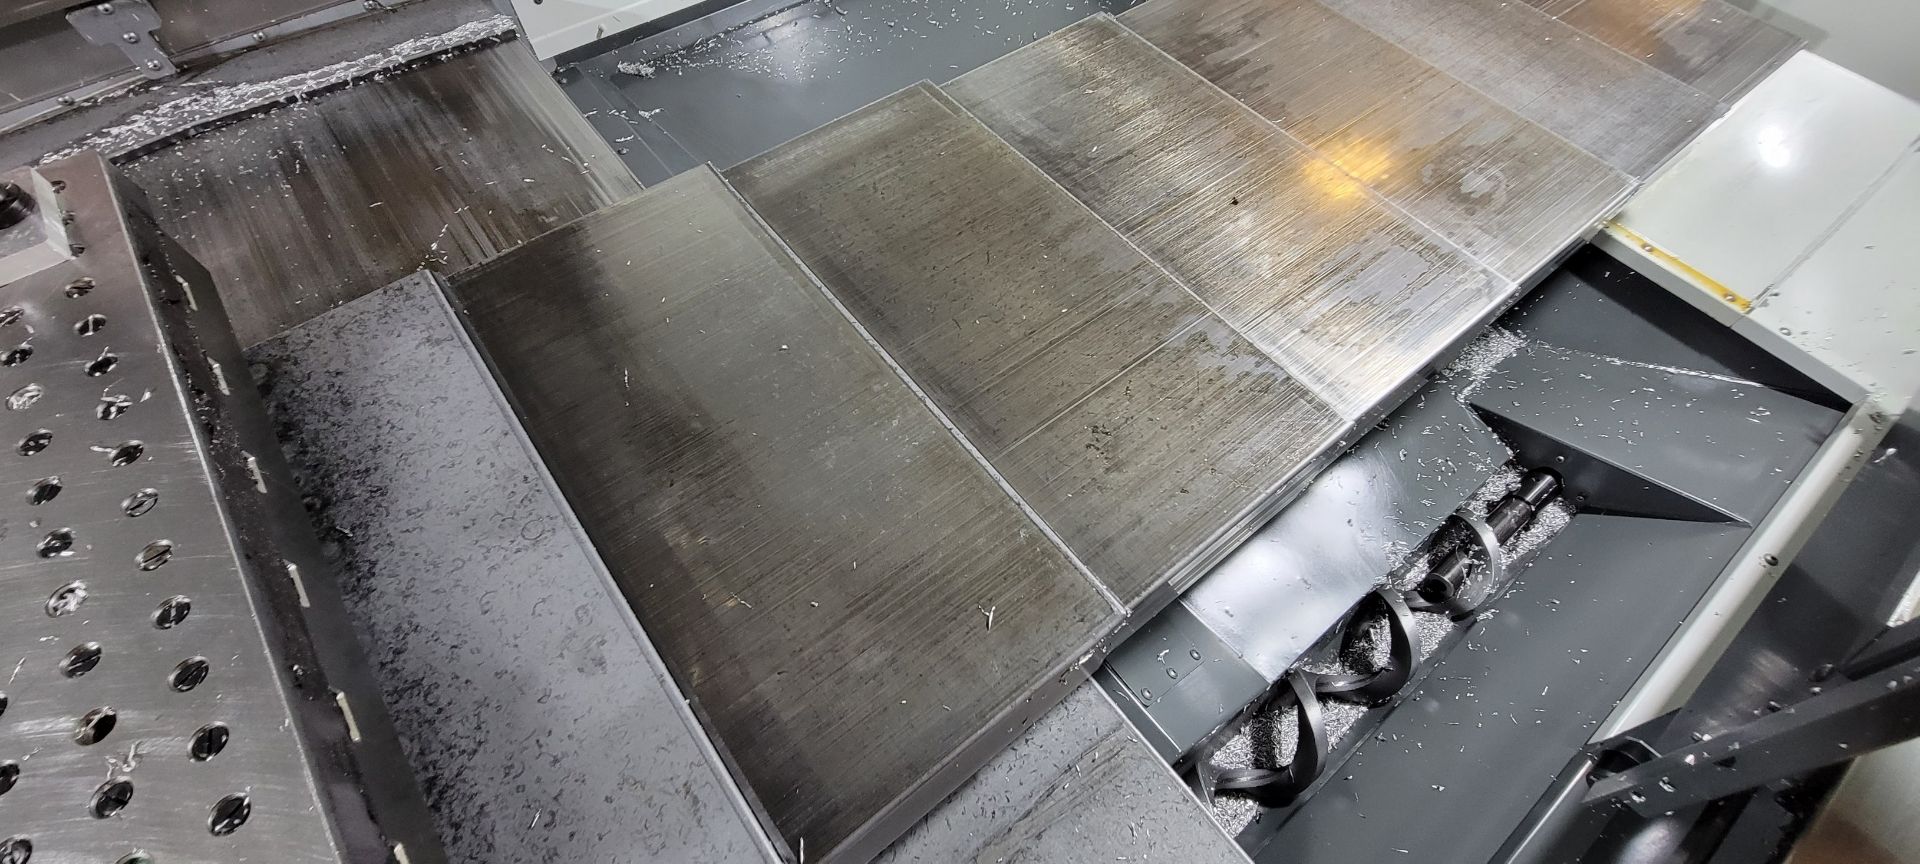 Haas VF-5SS CNC Vertical Maching Center - Image 12 of 23